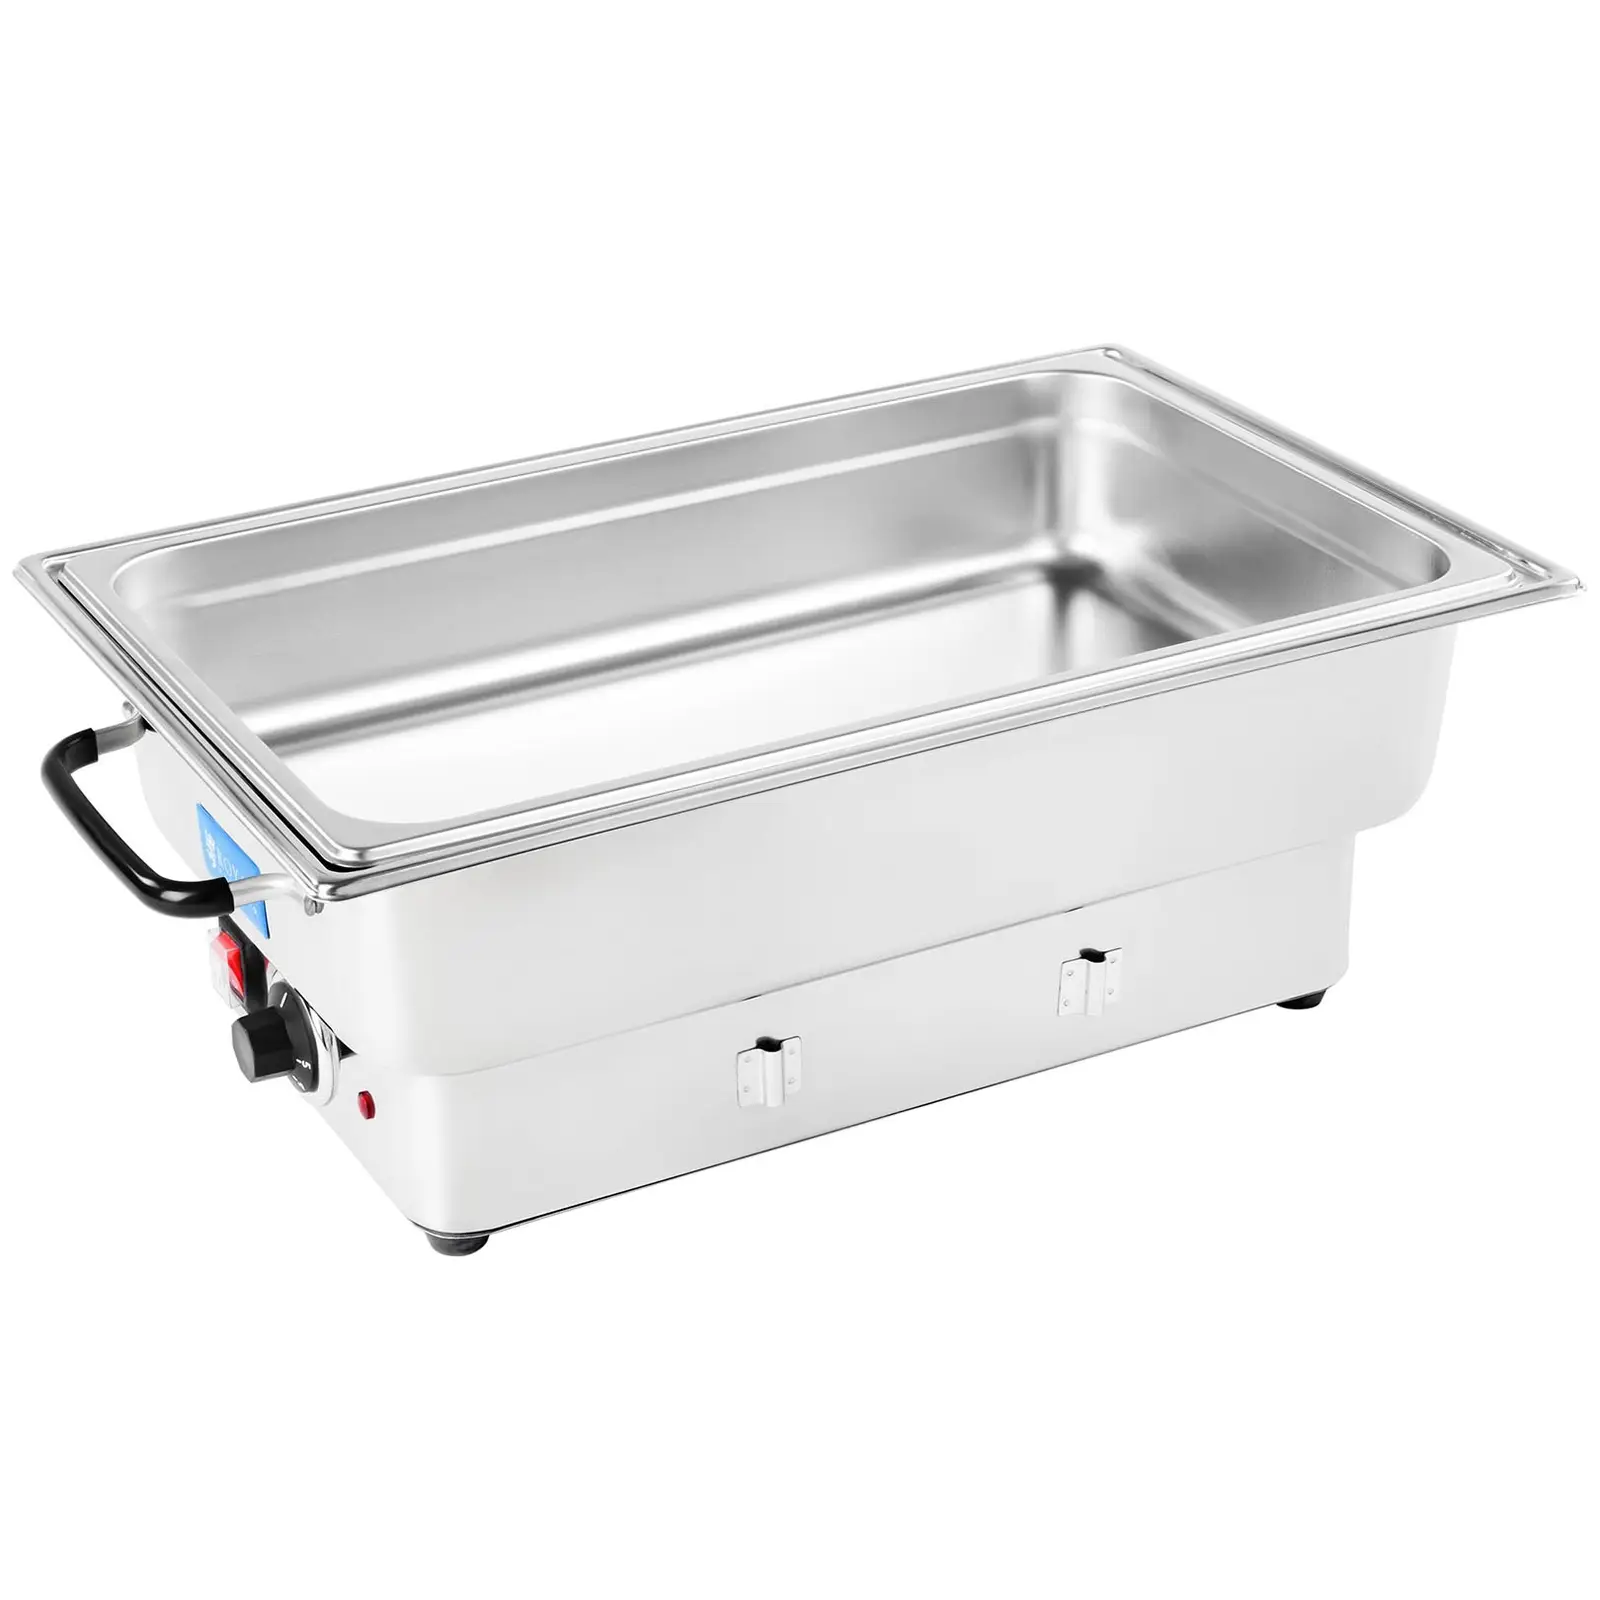 Chafing dish - 1 600 W - Bac GN 1/1 - 100 mm